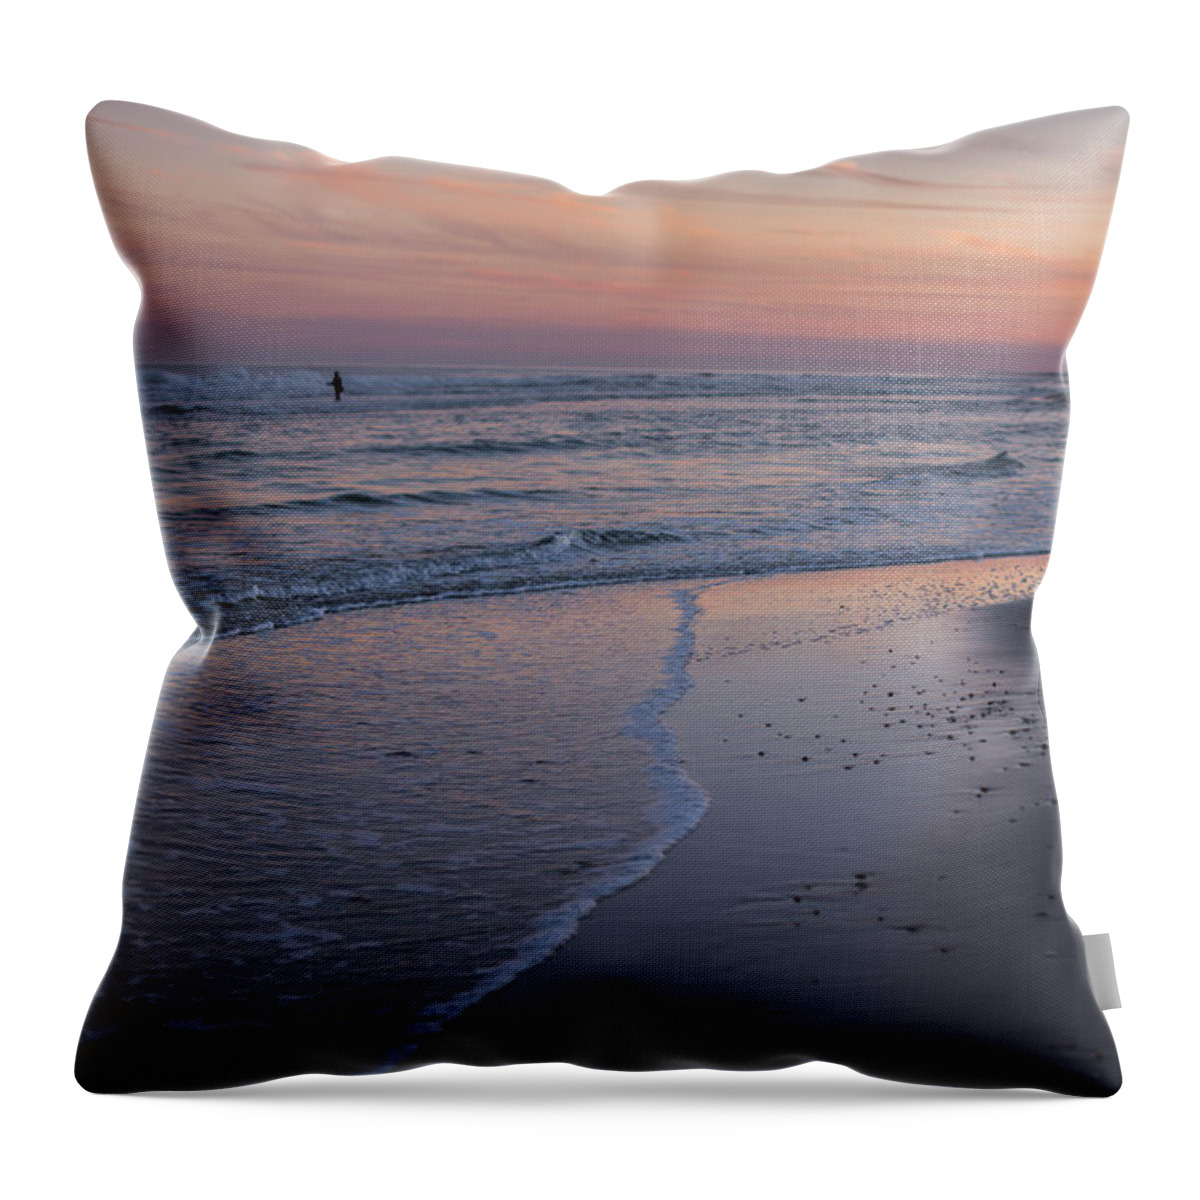 Sunset Fishing Seaside Park Nj Throw Pillow featuring the photograph Sunset Fishing Seaside Park NJ by Terry DeLuco